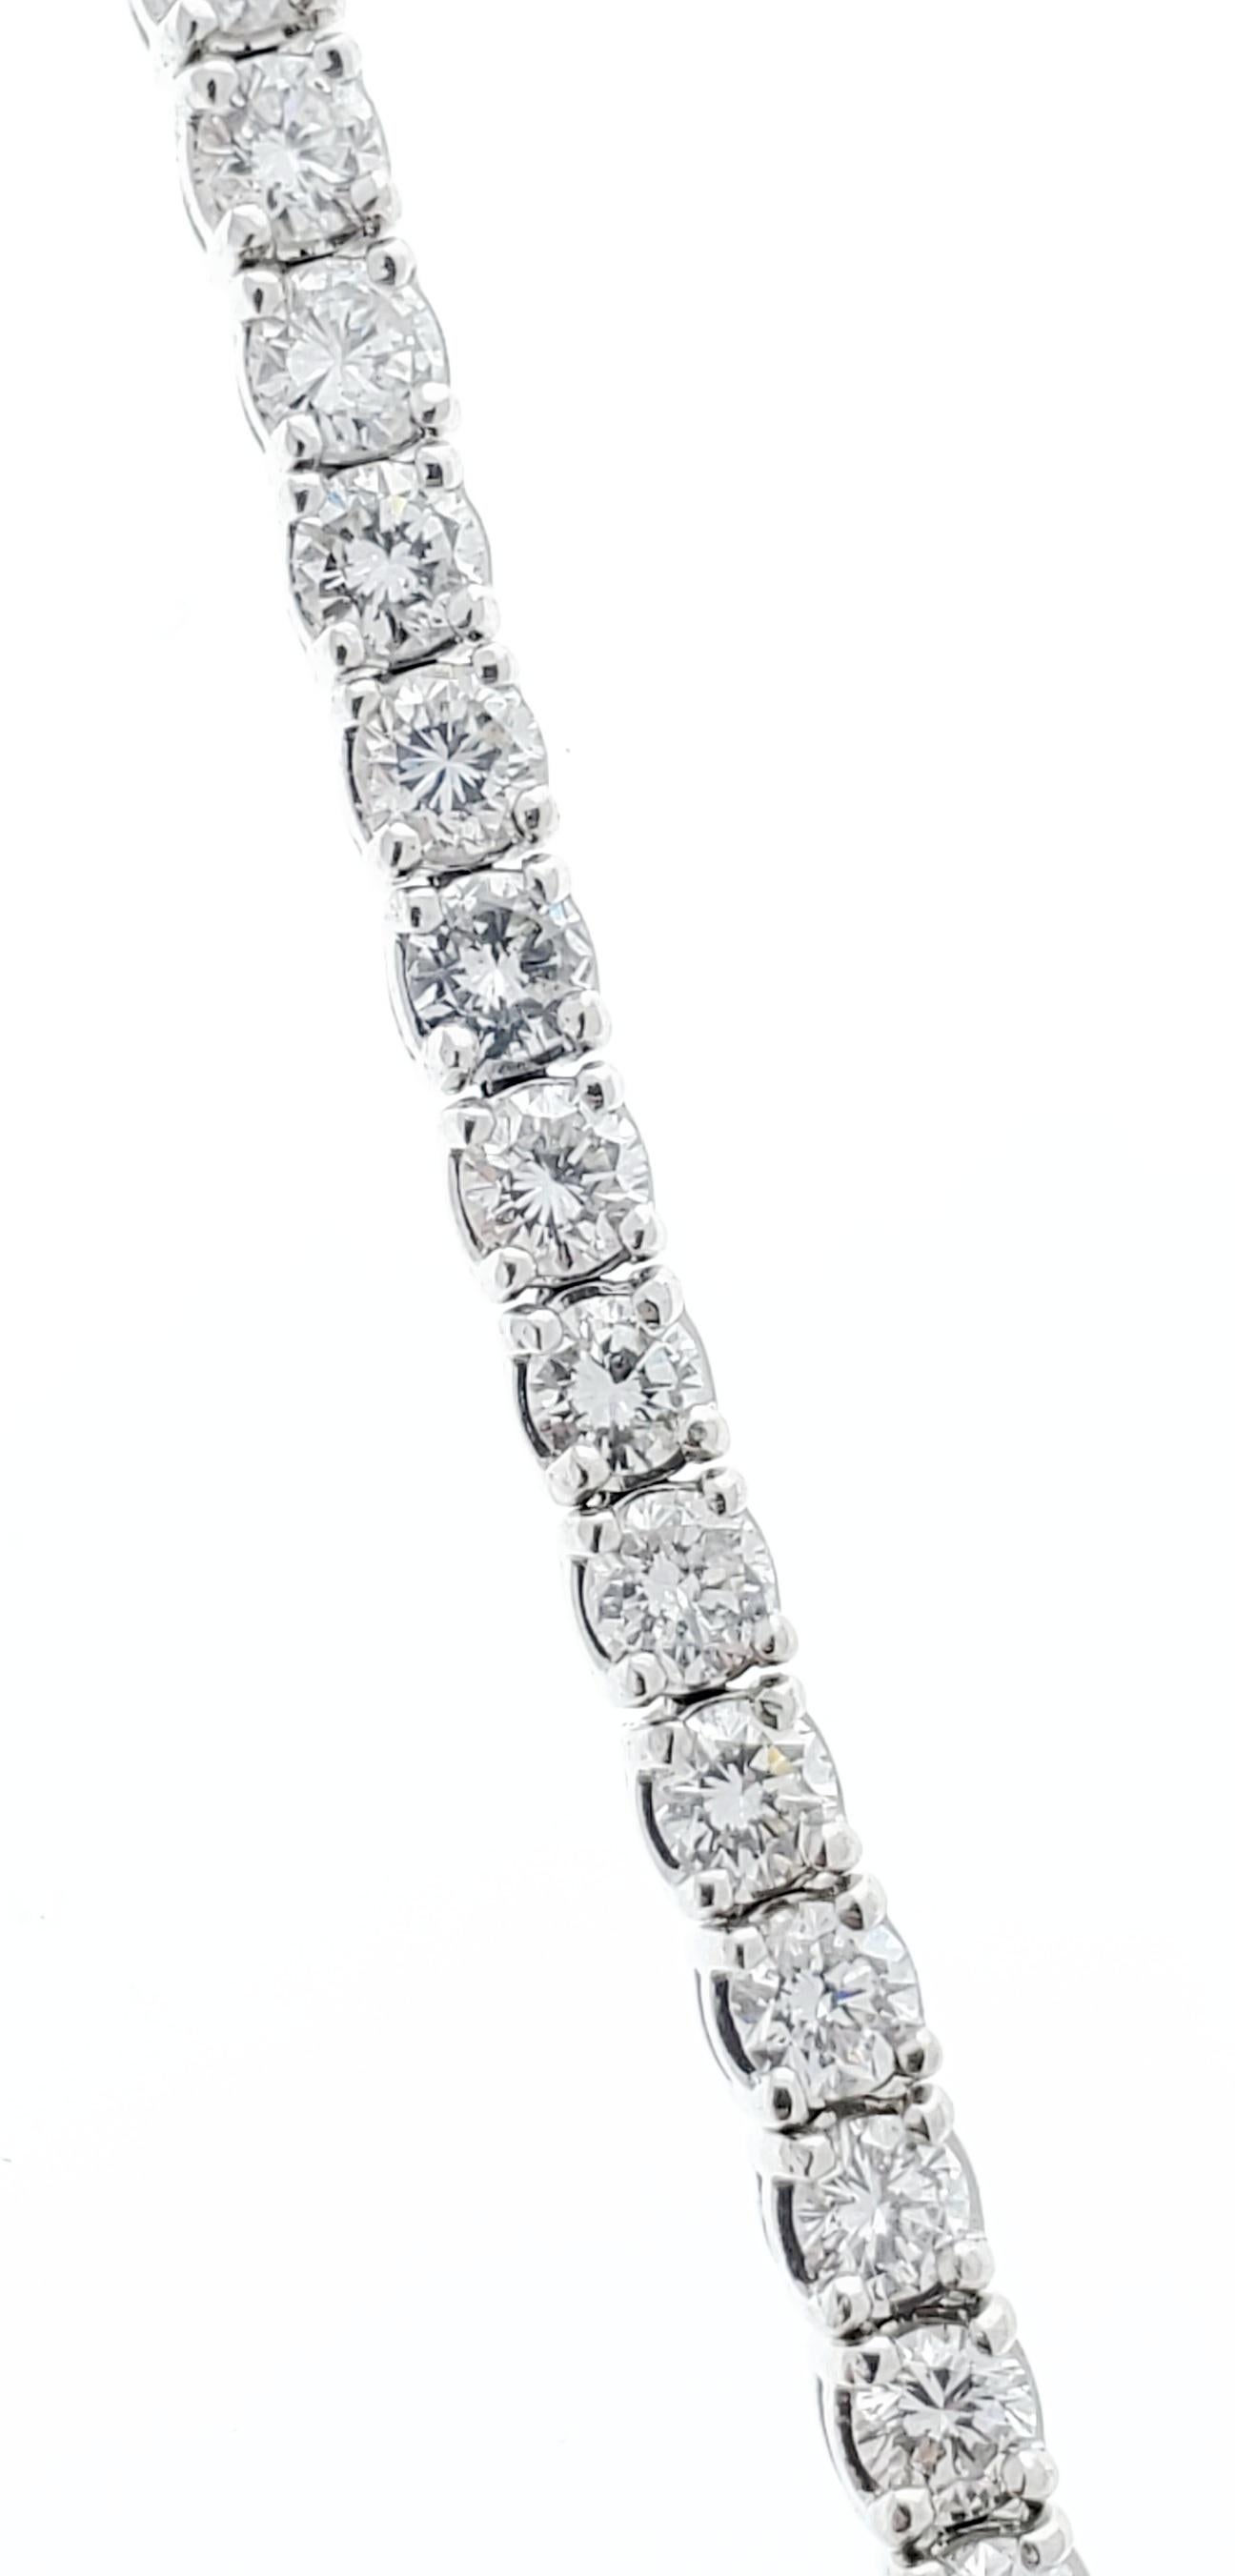 Designed in 14 karat white gold, this gorgeous classic tennis bracelet features a total of 4.50 carats of 59 sparkling round brilliant cut diamonds that are basket prong set around it, eternity style. This sophisticated tennis bracelet is finished